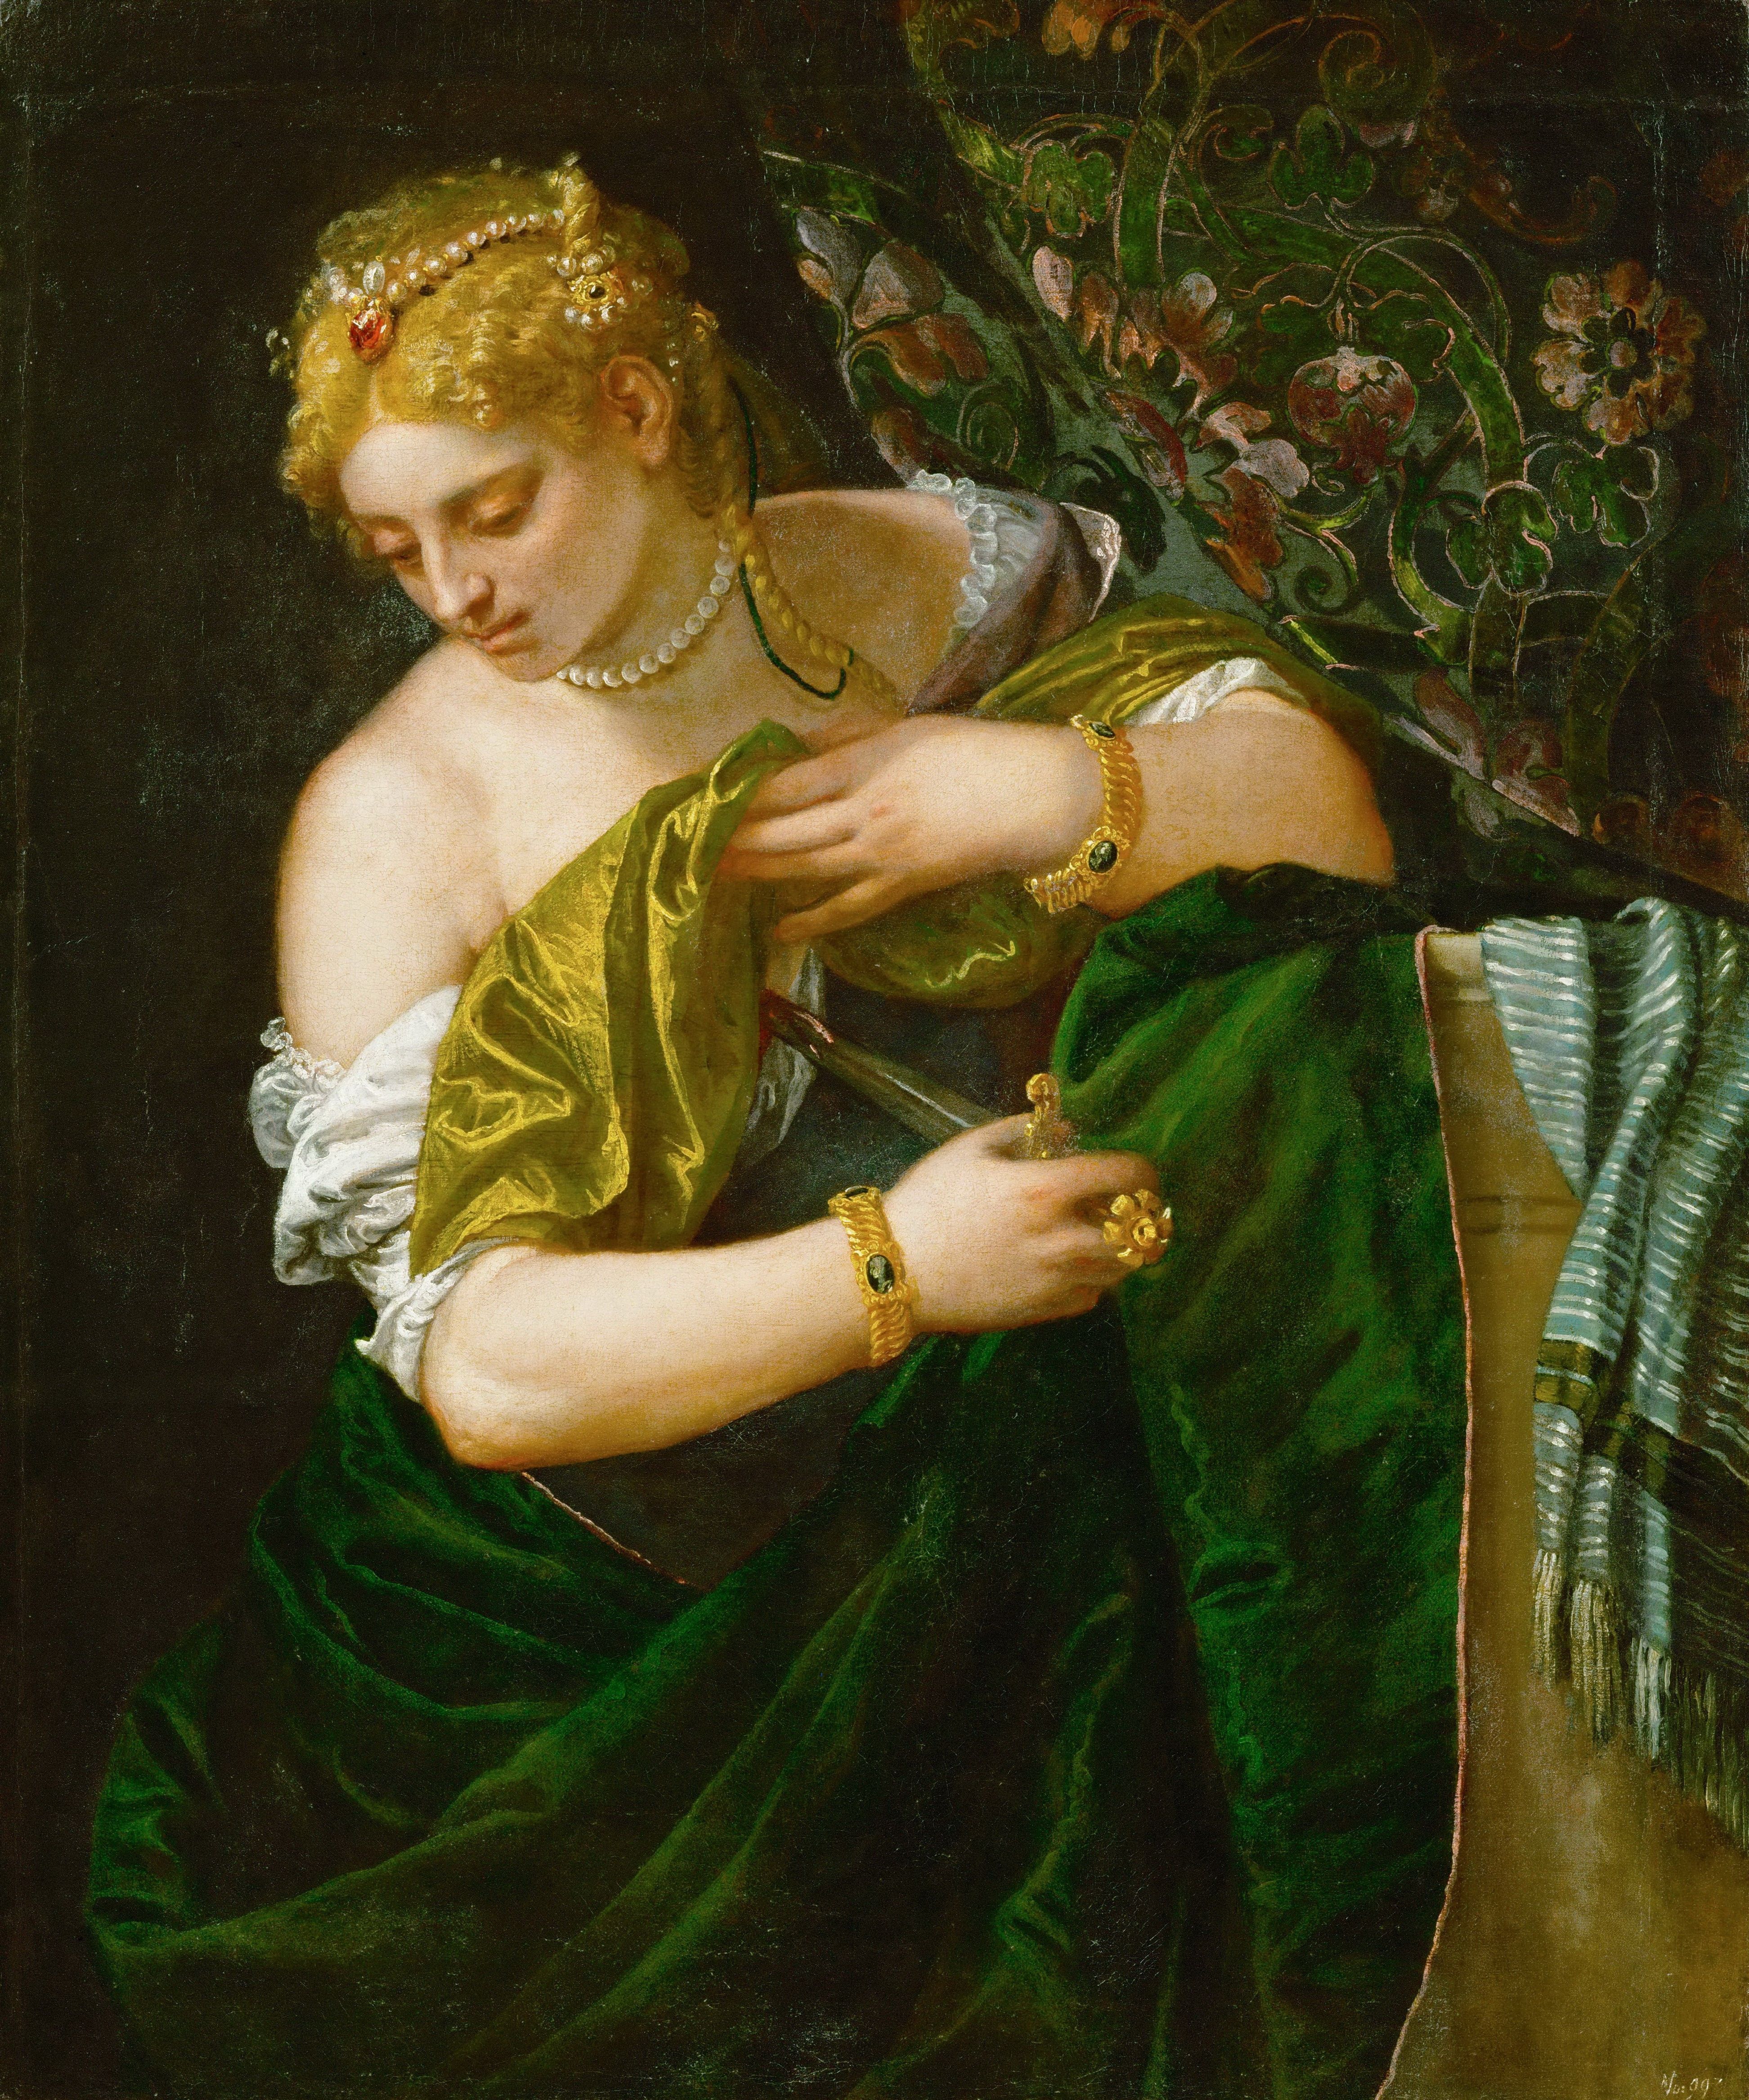 The Suicide of Lucretius by Paolo Veronese, c. 1583. Kunsthistorisches Museum.